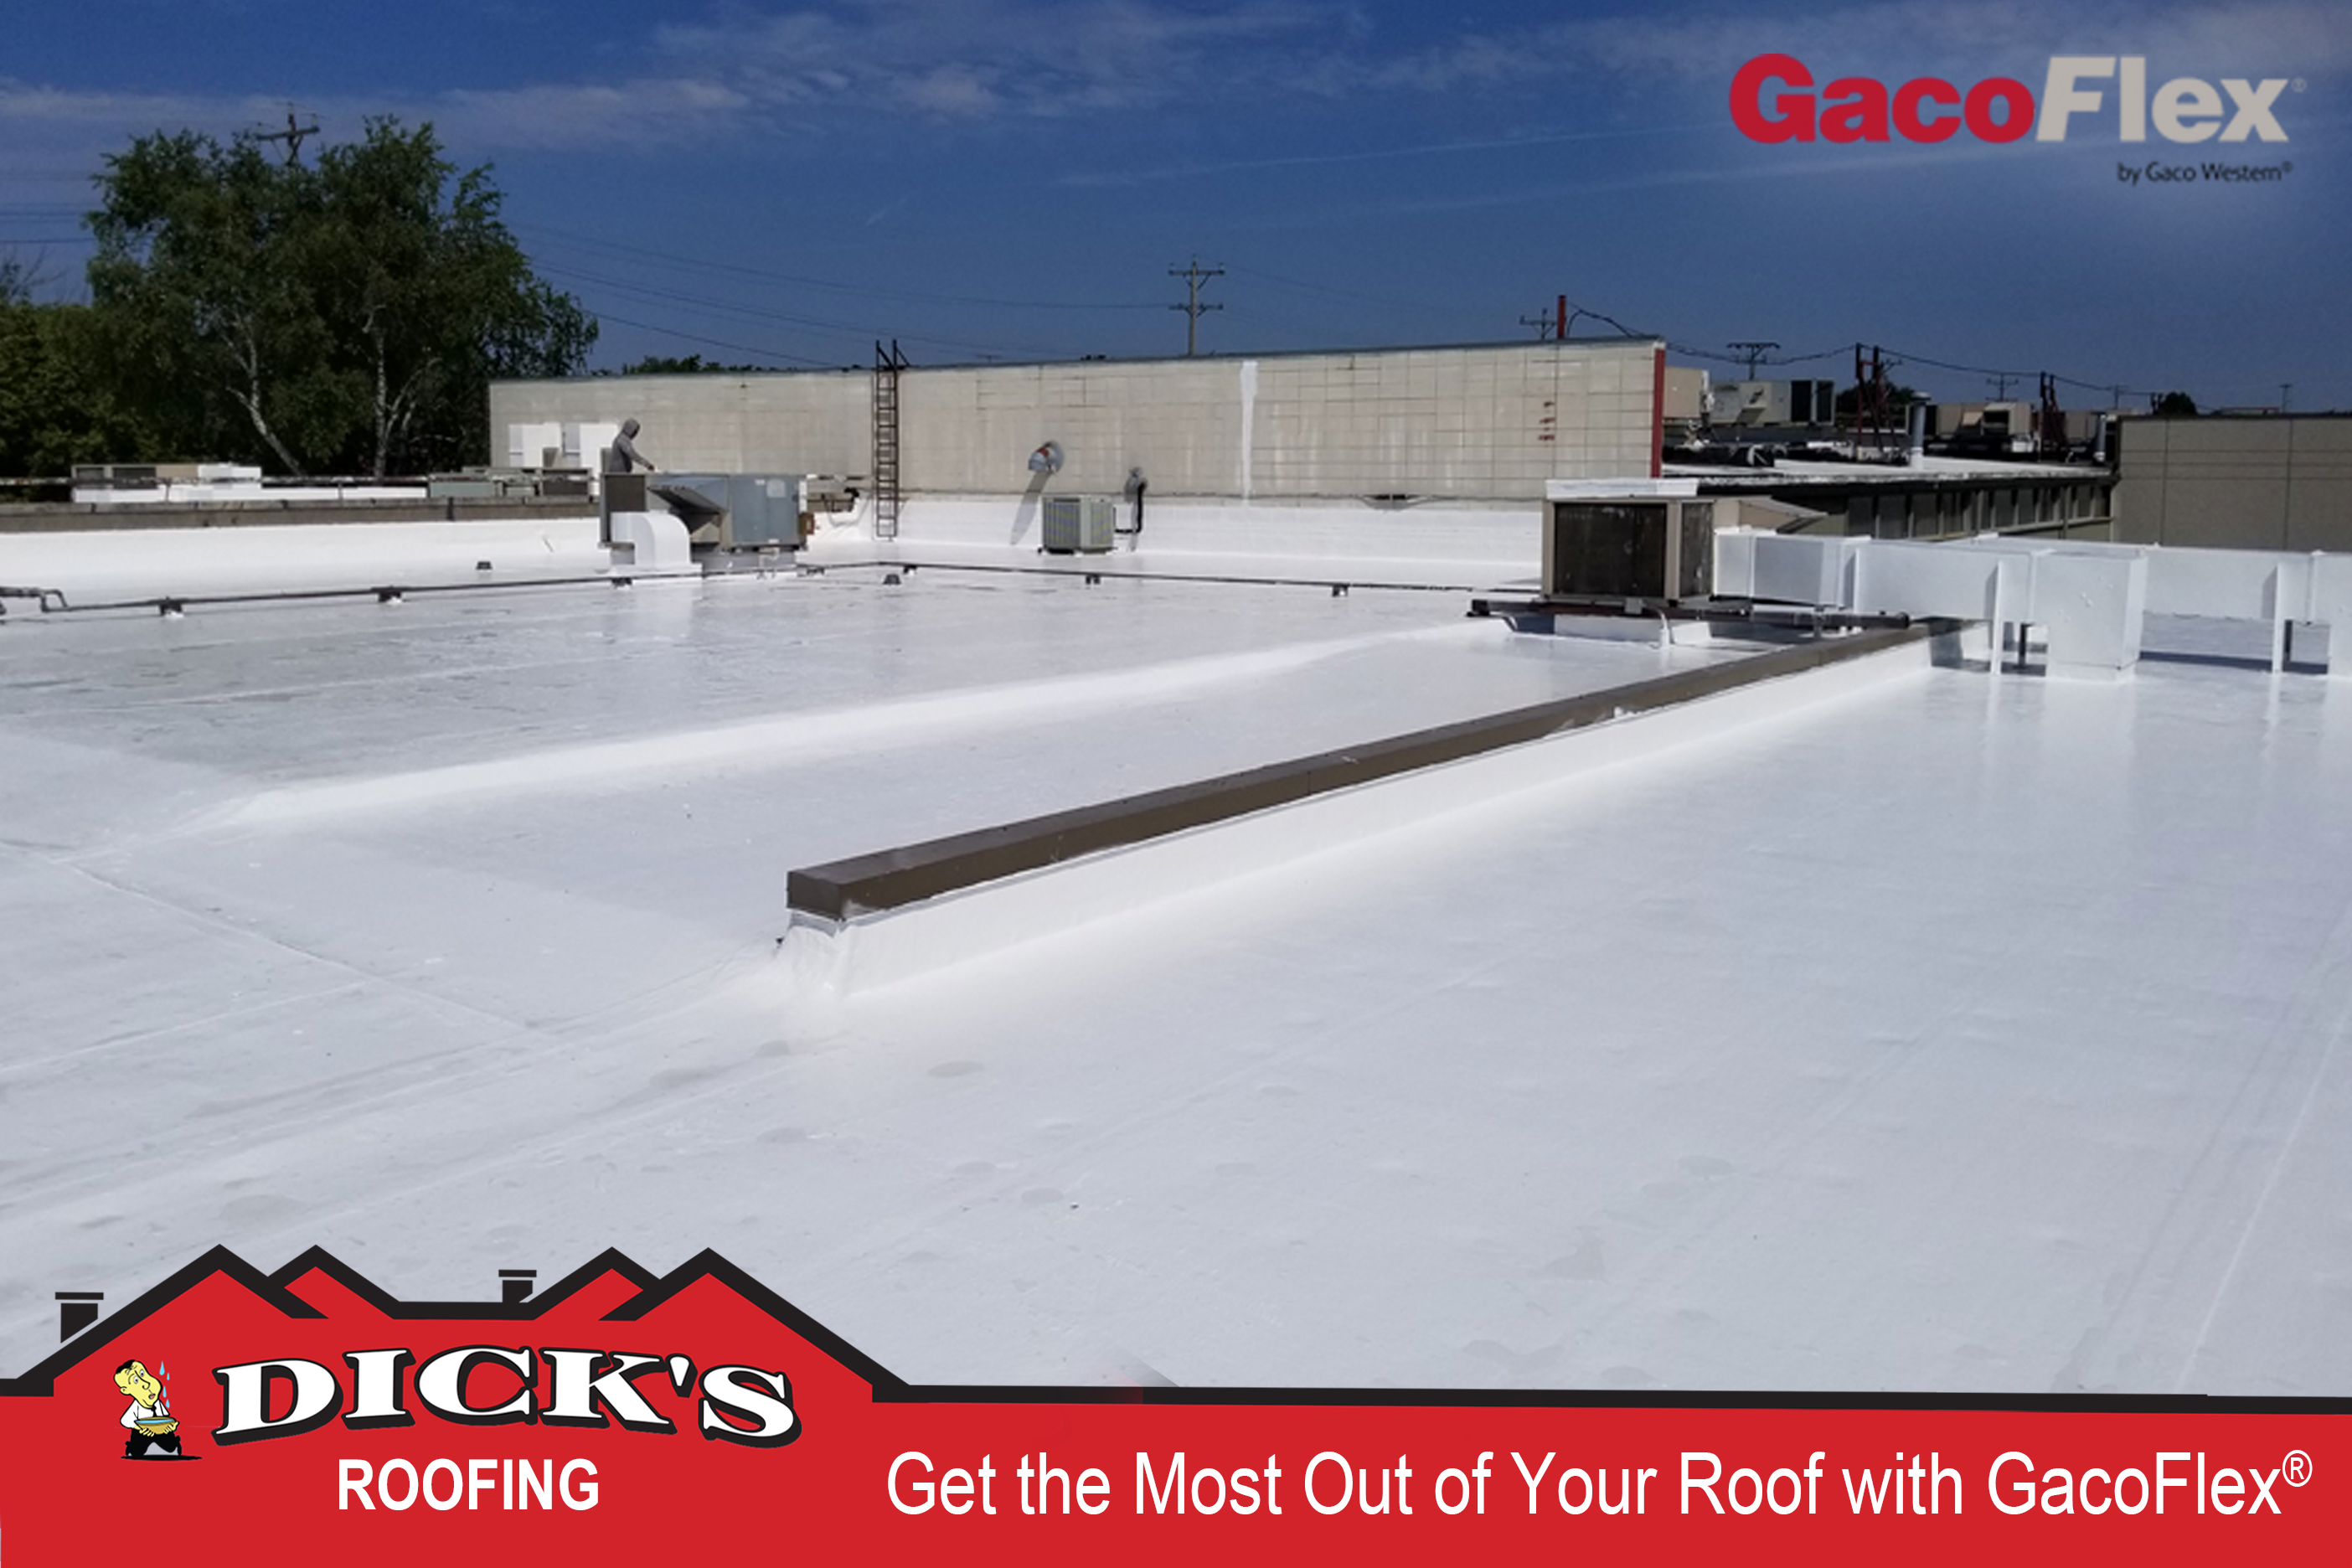 GacoFlex® Products Help You Get the Most Out of Your Roof